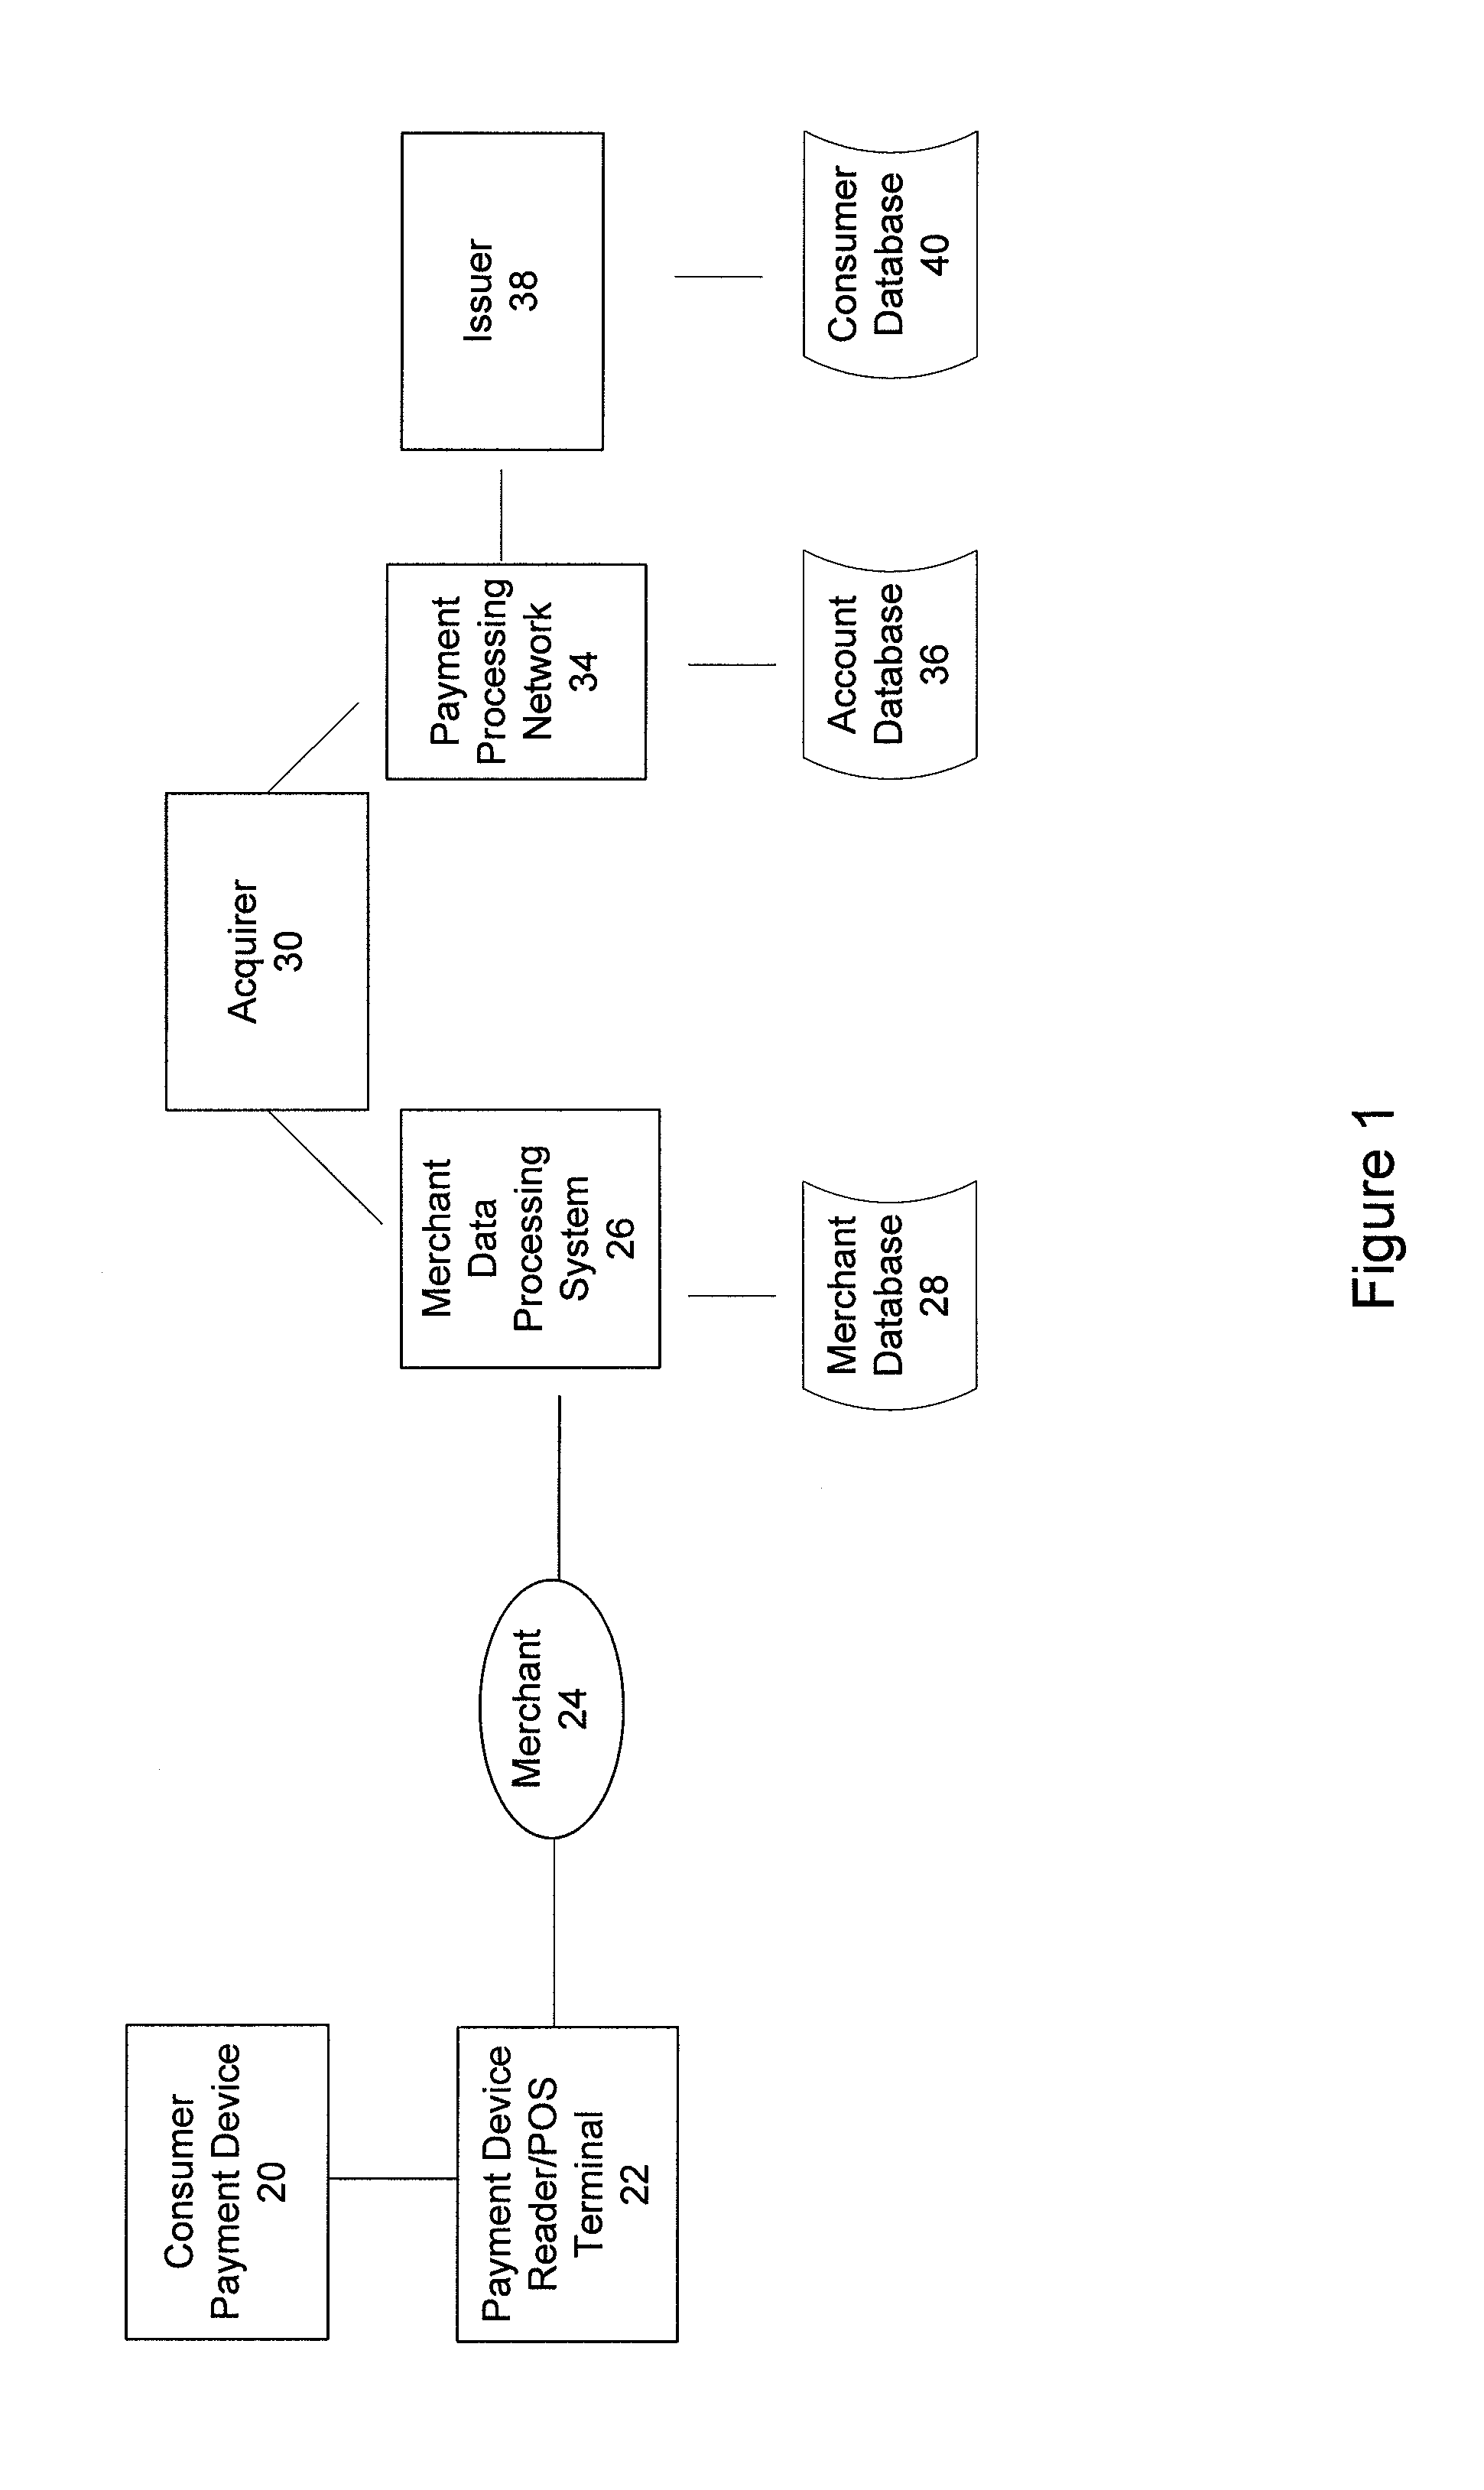 Method of performing transactions with contactless payment devices using pre-tap and two-tap operations